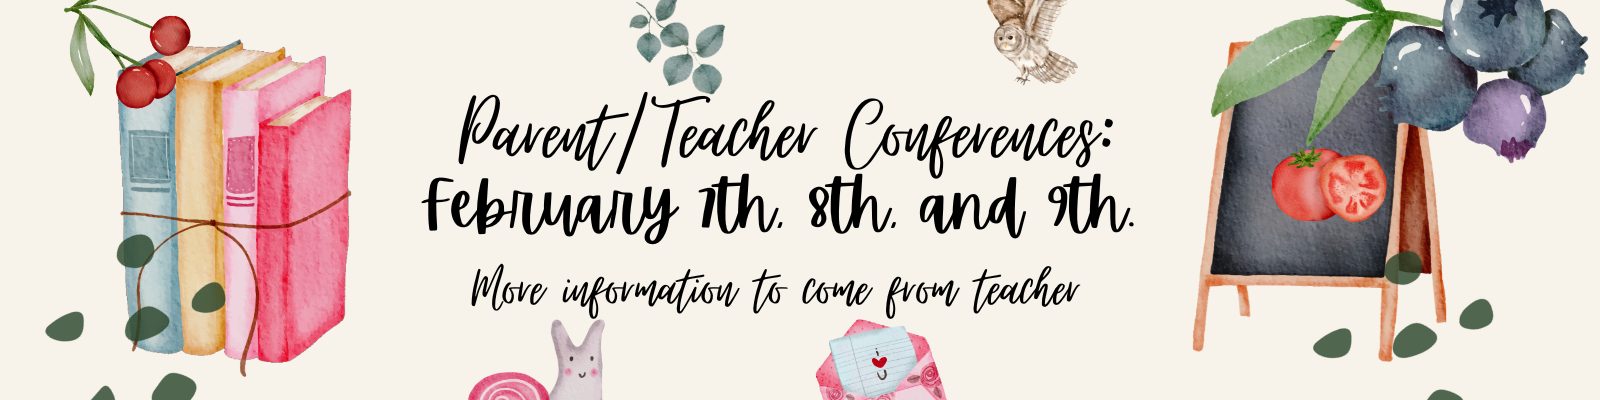 Parent Teacher Conferences: February 7th, 8th, and 9th. More information to come from teacher.